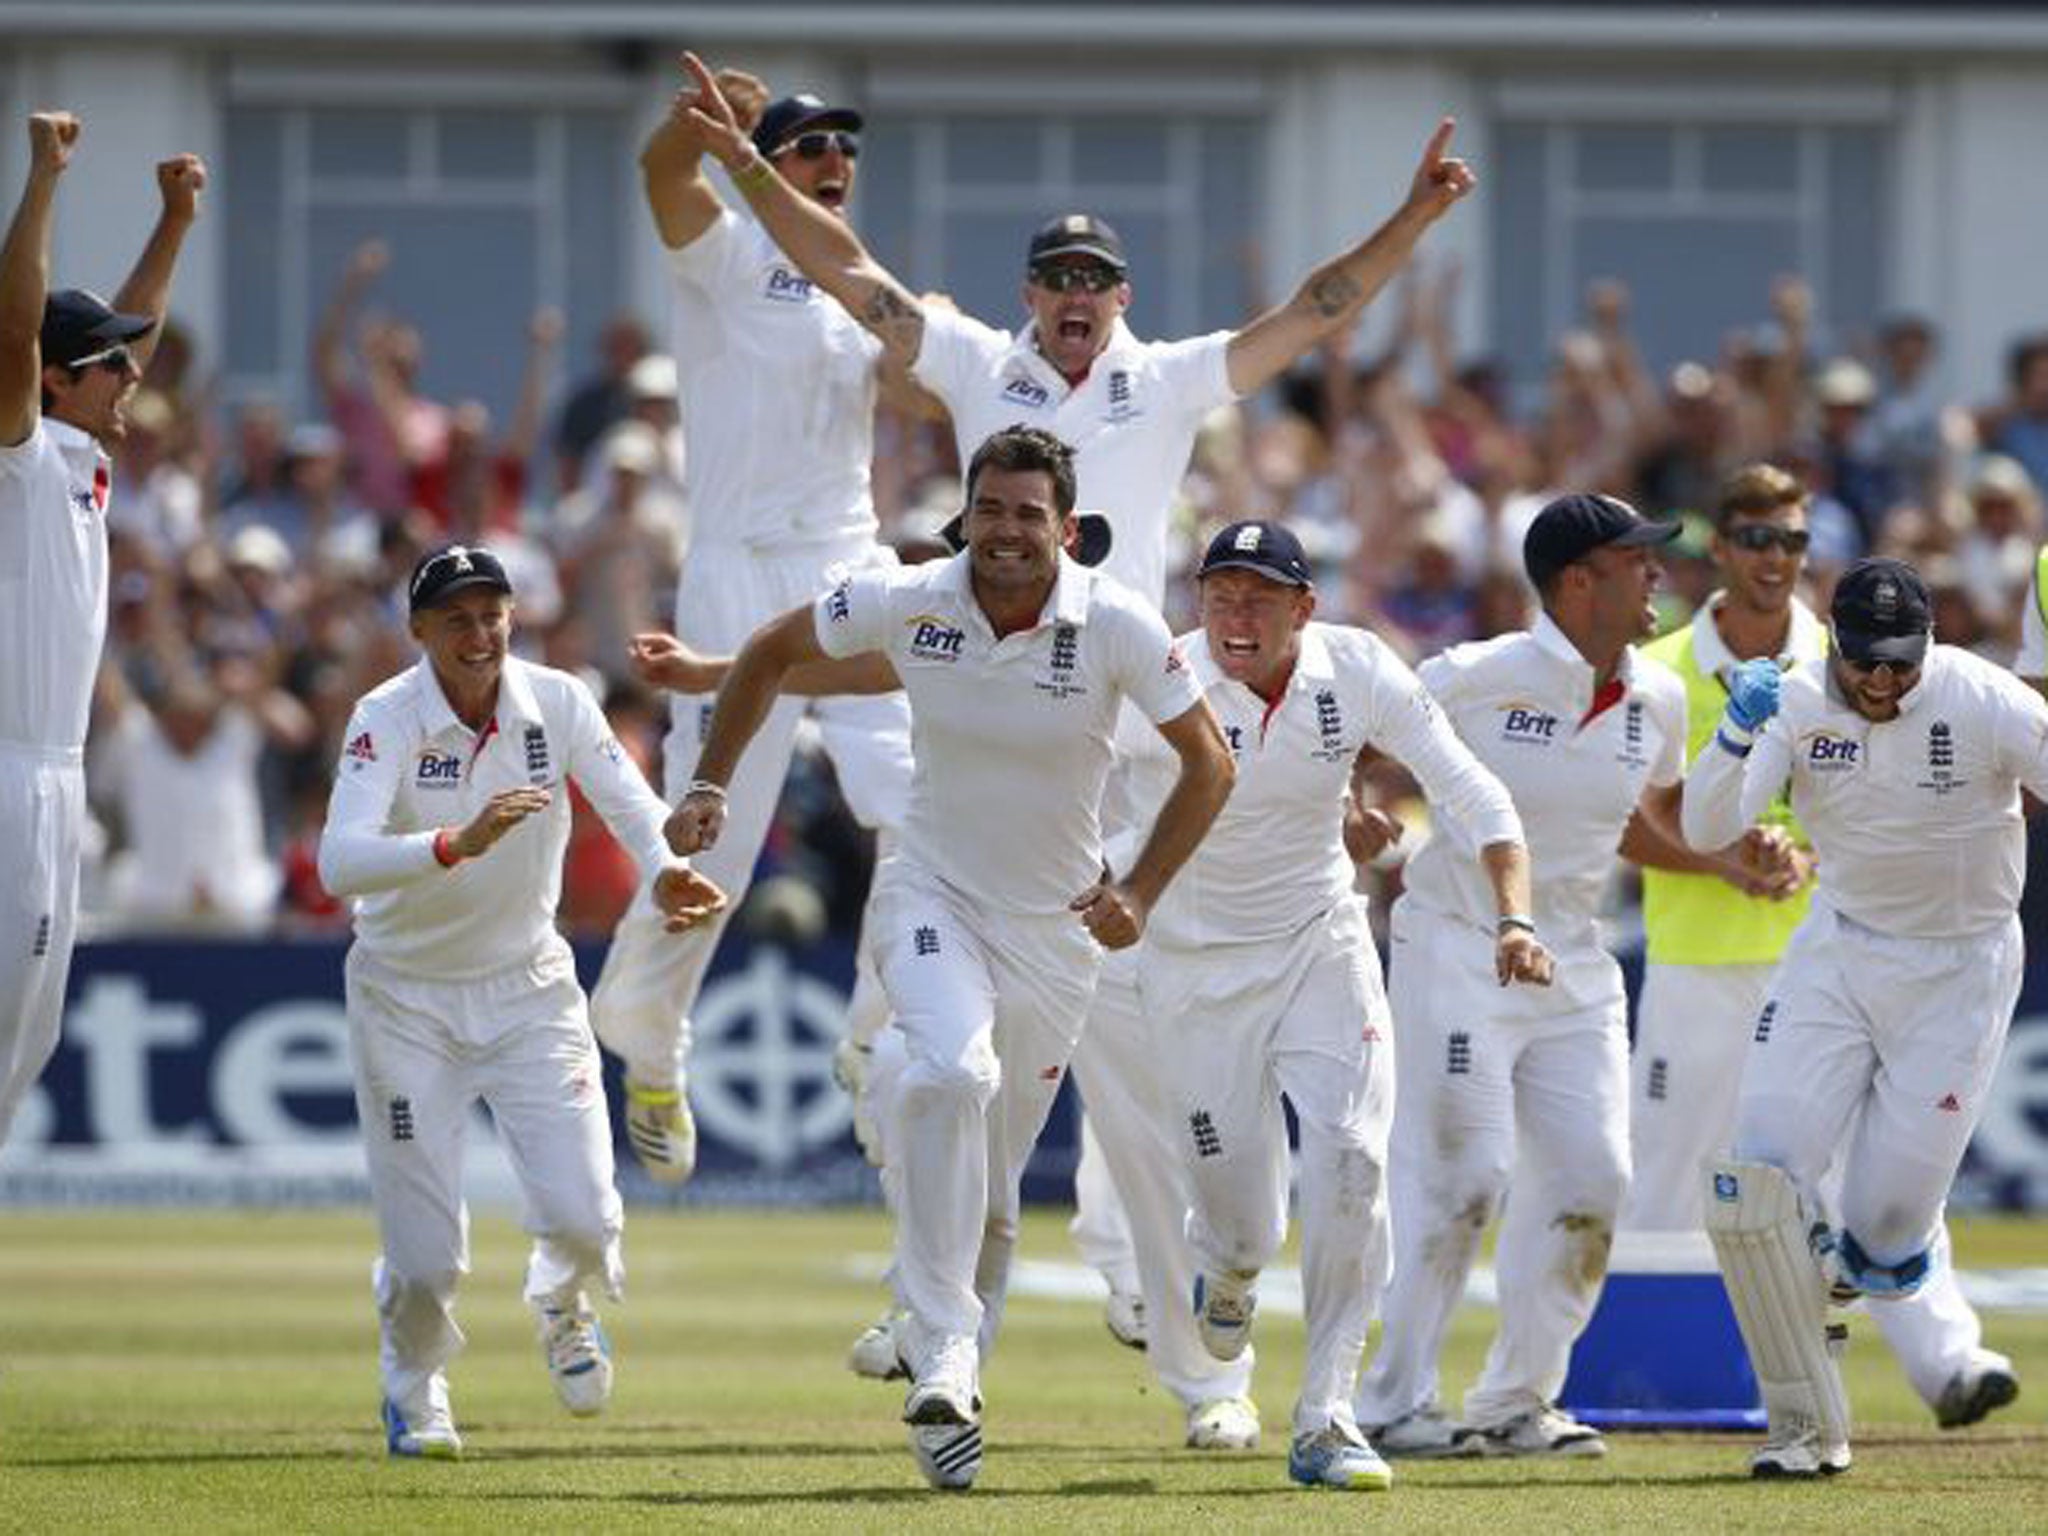 England celebrate their victory after a compelling first Test